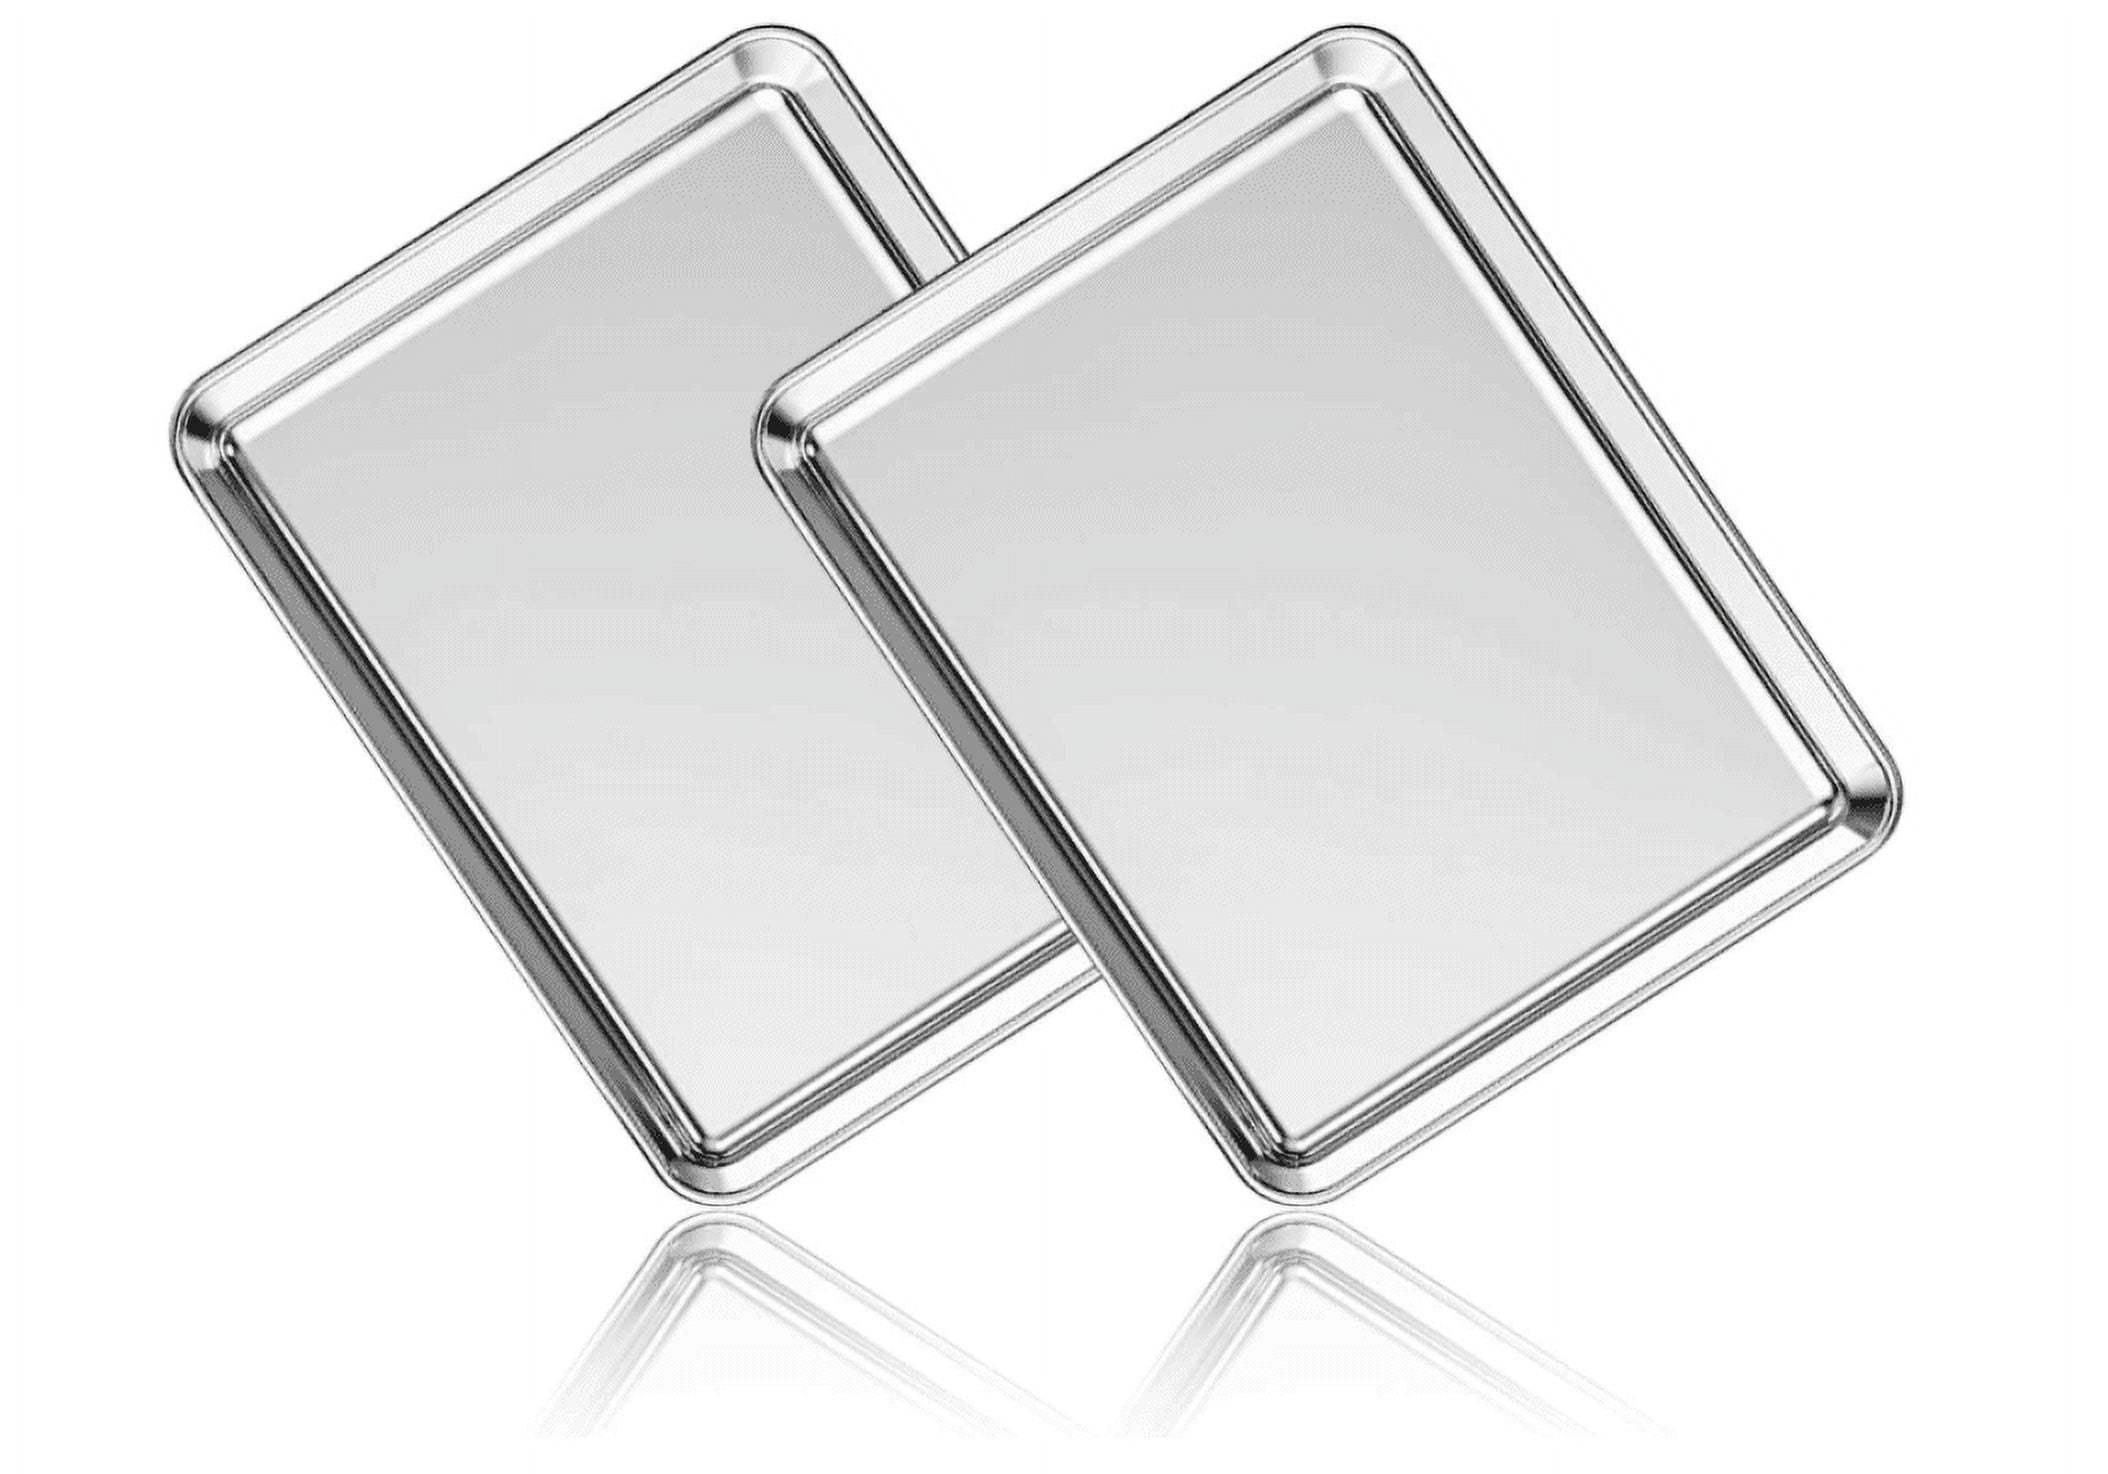 Small Baking Sheets Pans, HEAHYSI Mini Stainless Steel Cookie Sheets & Toaster Oven Tray Pan,Non Toxic & Healthy,Superior Mirror Finish & Easy Clean